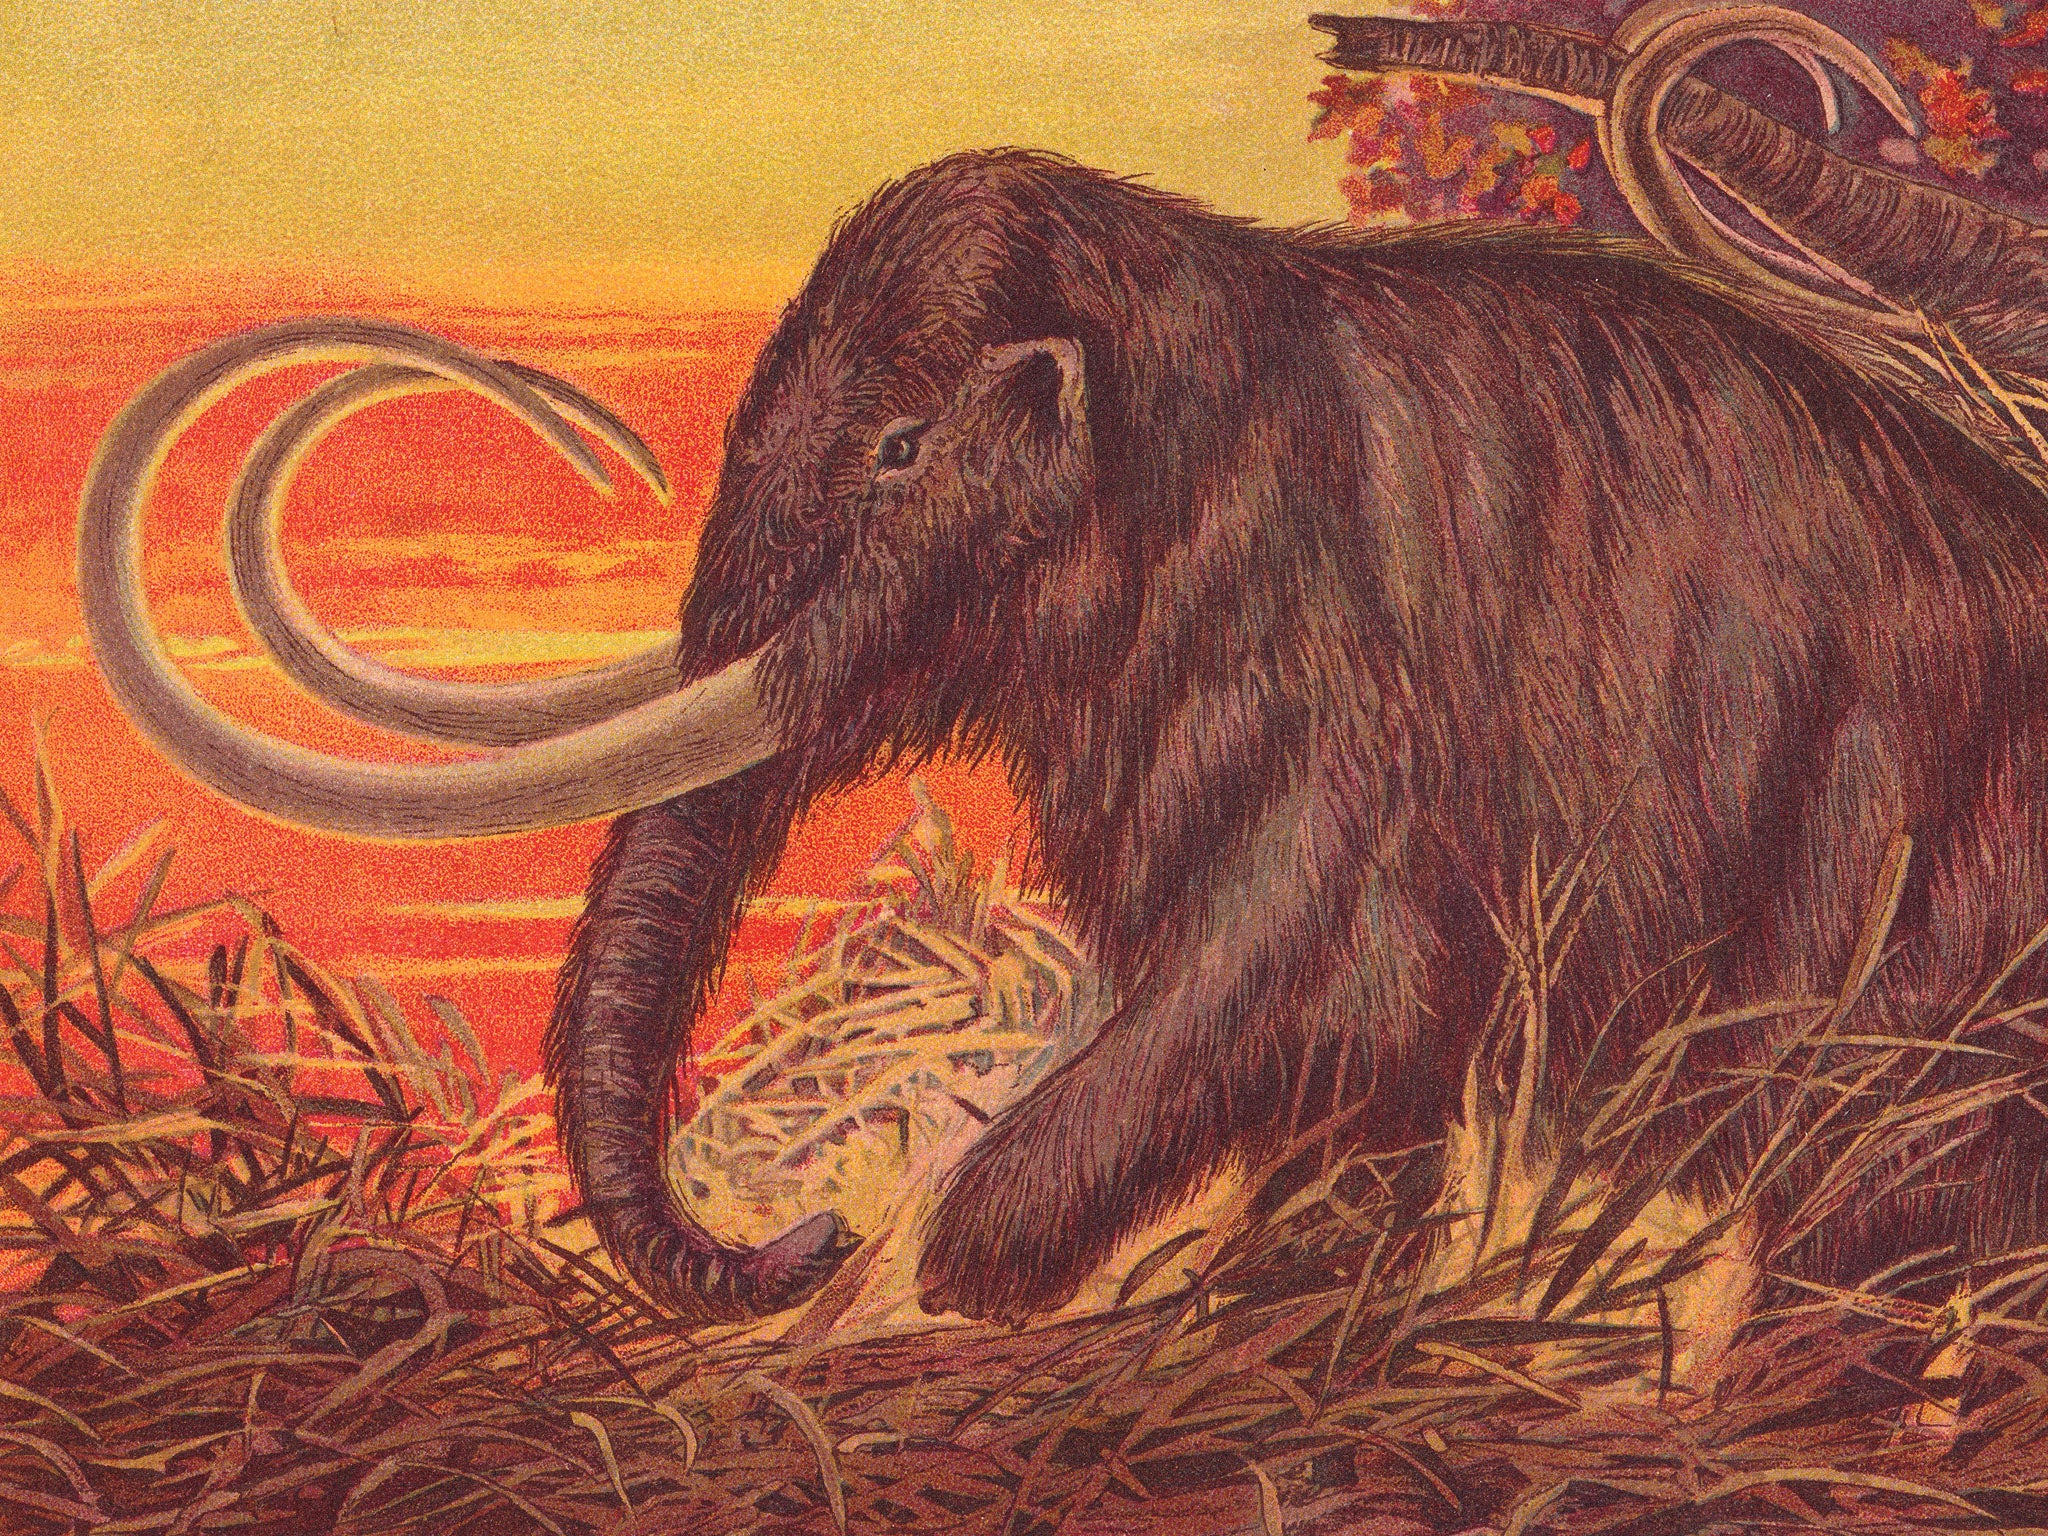 A 1900 illustration of the woolly mammoth, which may be headed to a supermarket near you in the coming decades